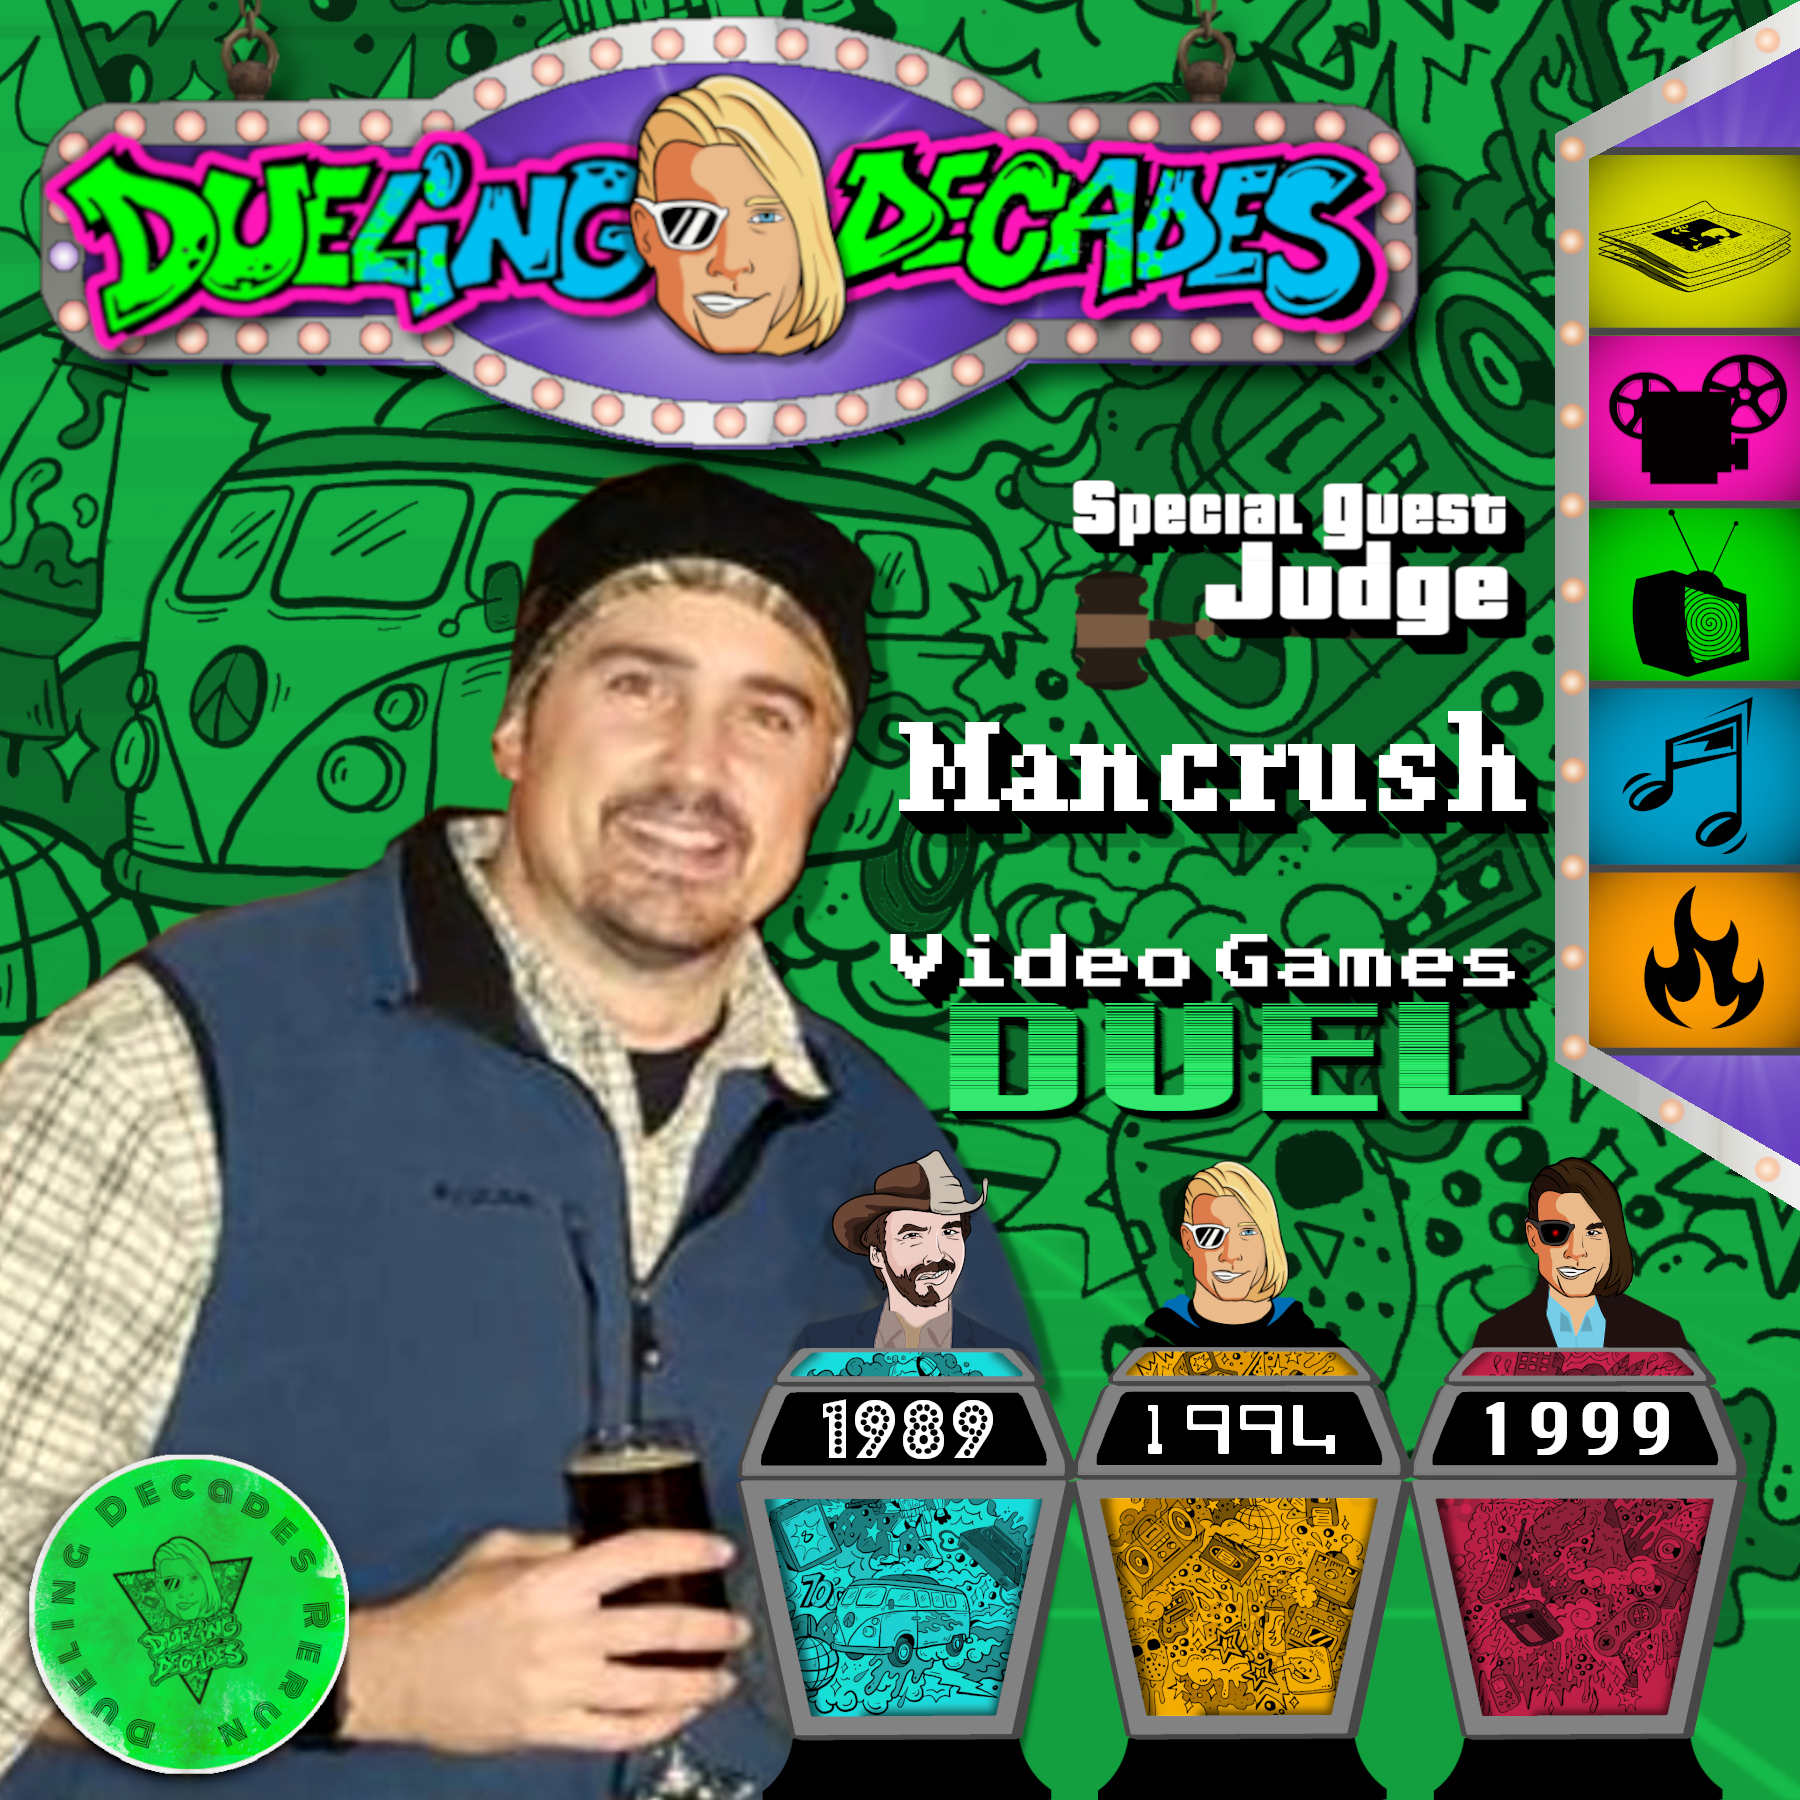 Mancrush judges this throwback triple threat video game battle between 1989, 1994 and 1999!